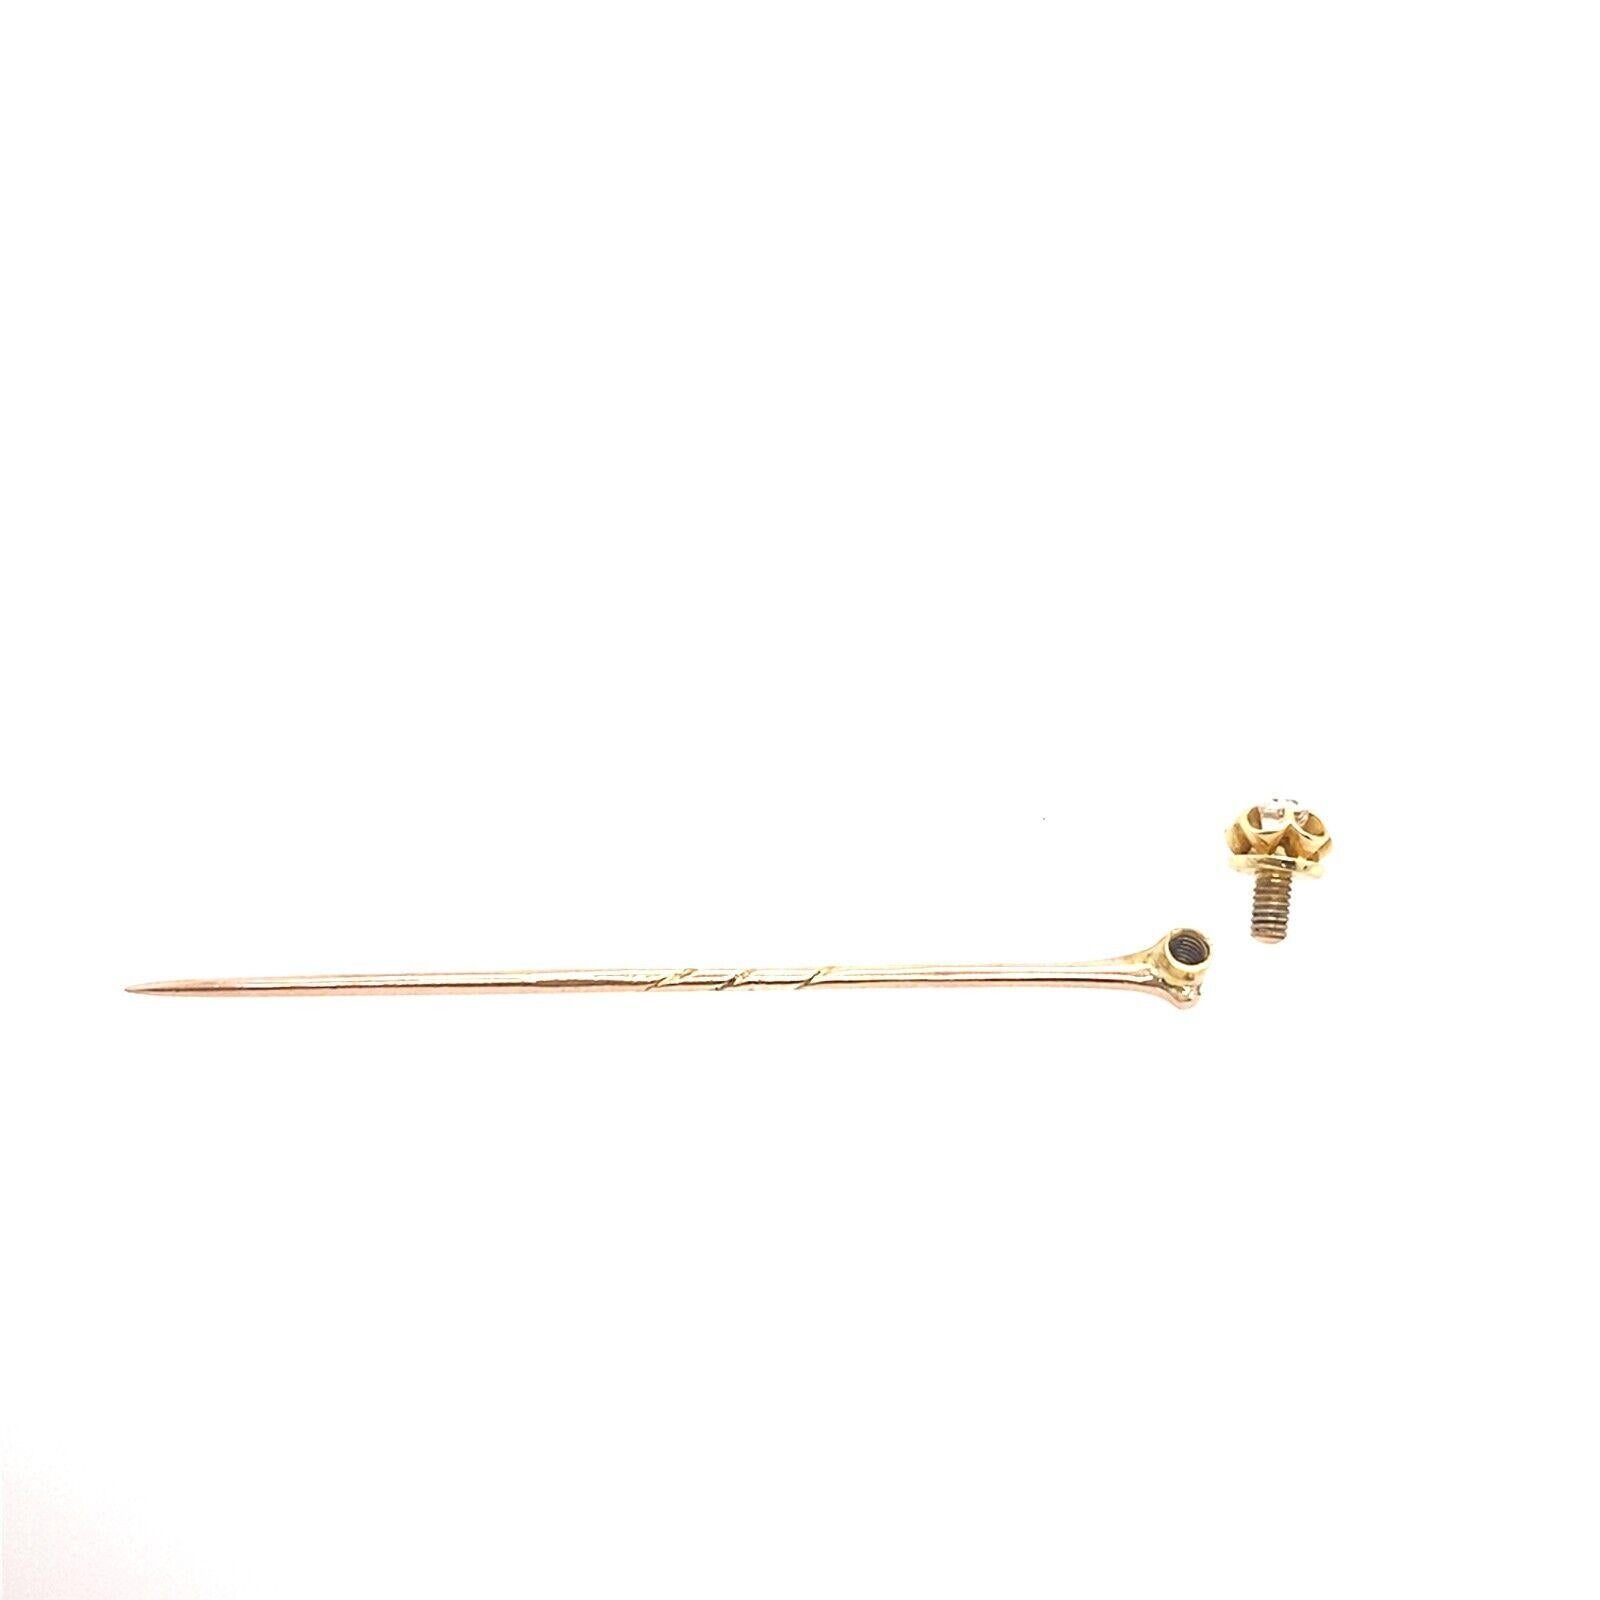 This stunning stickpin in 14ct Gold head and 9ct Gold pin, features a 0.12ct G colour VS purity Victorian cut Diamond. The Diamond is set in a classic claw setting - the head is removable with base metal pin protector.

Additional Information:
Total